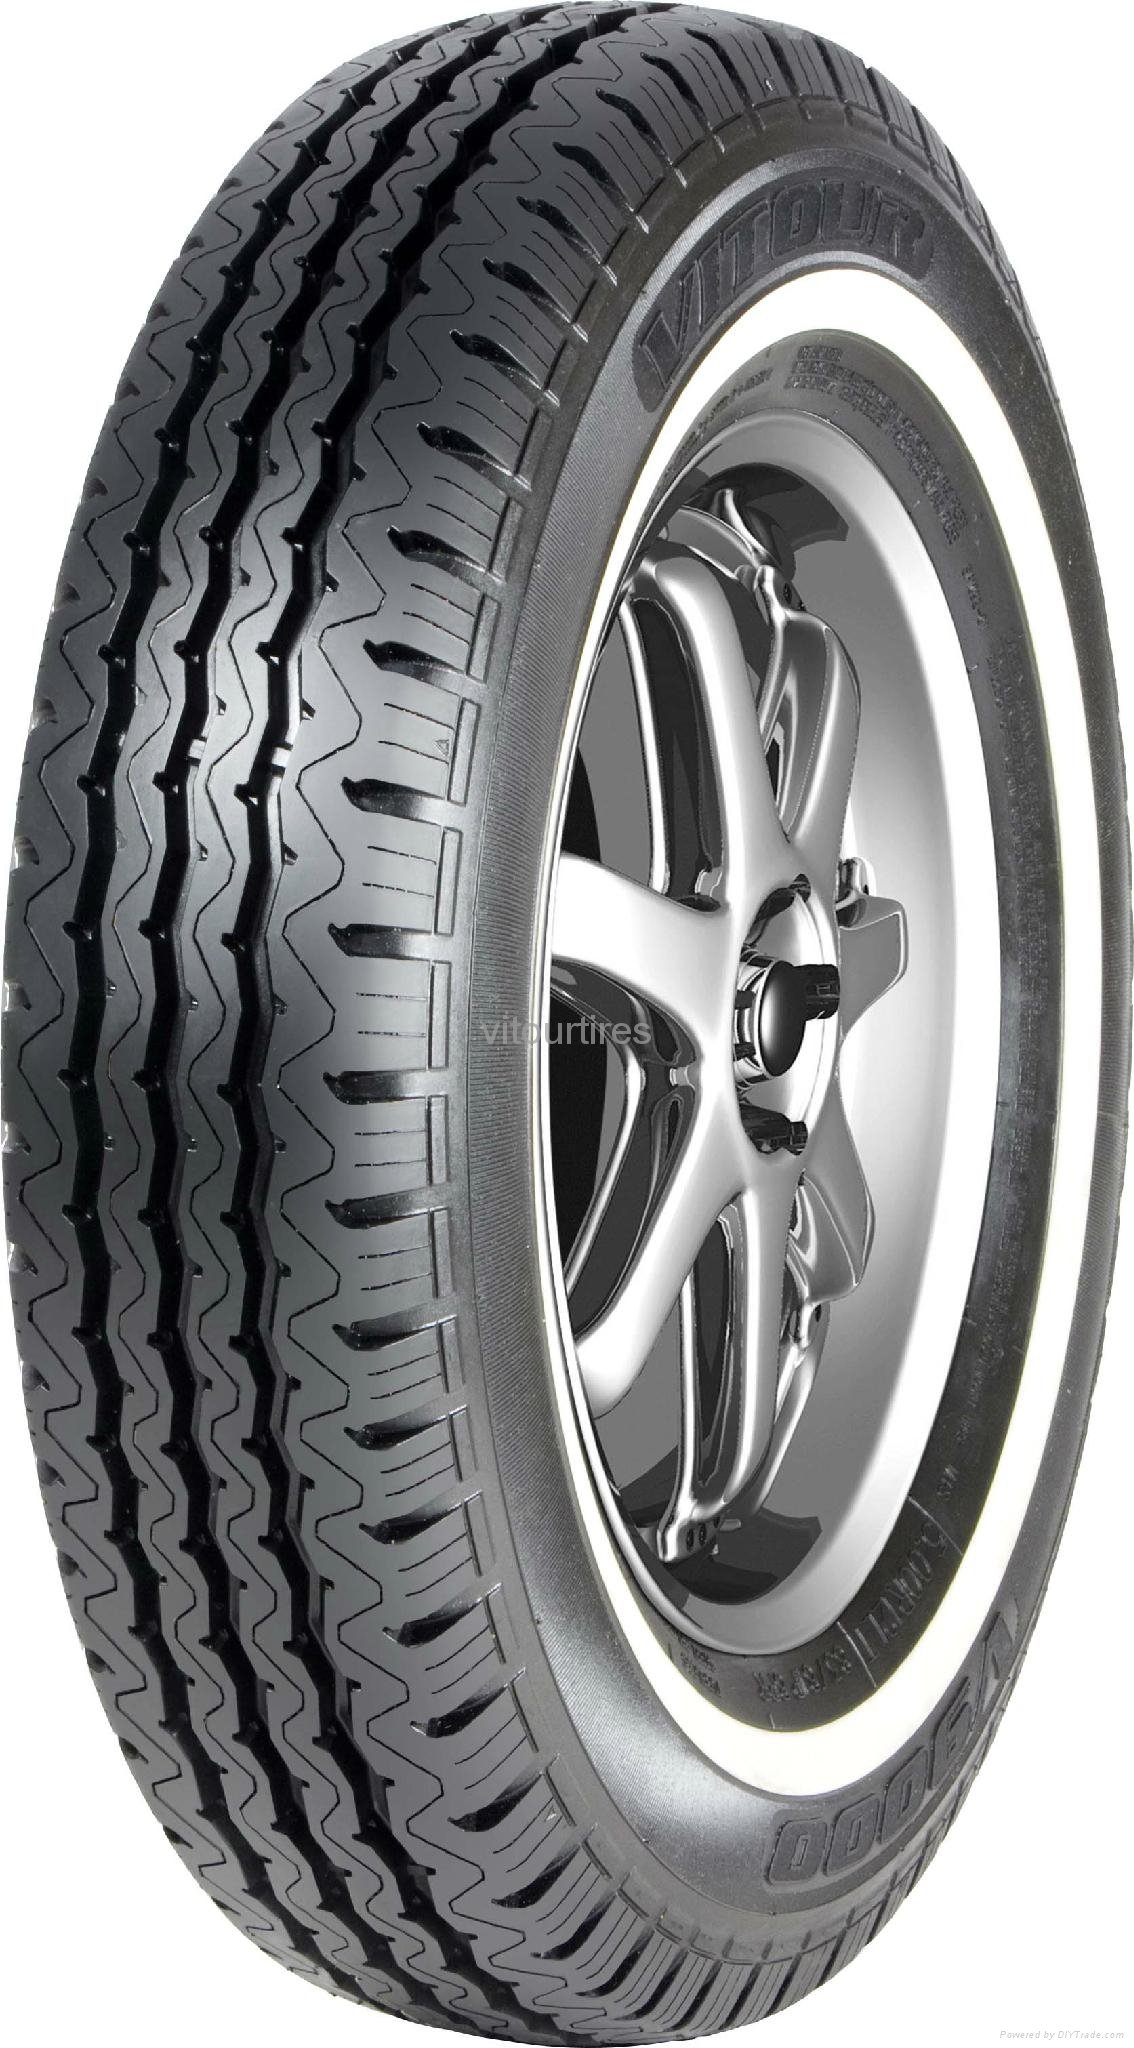 White side wall LTR Tires